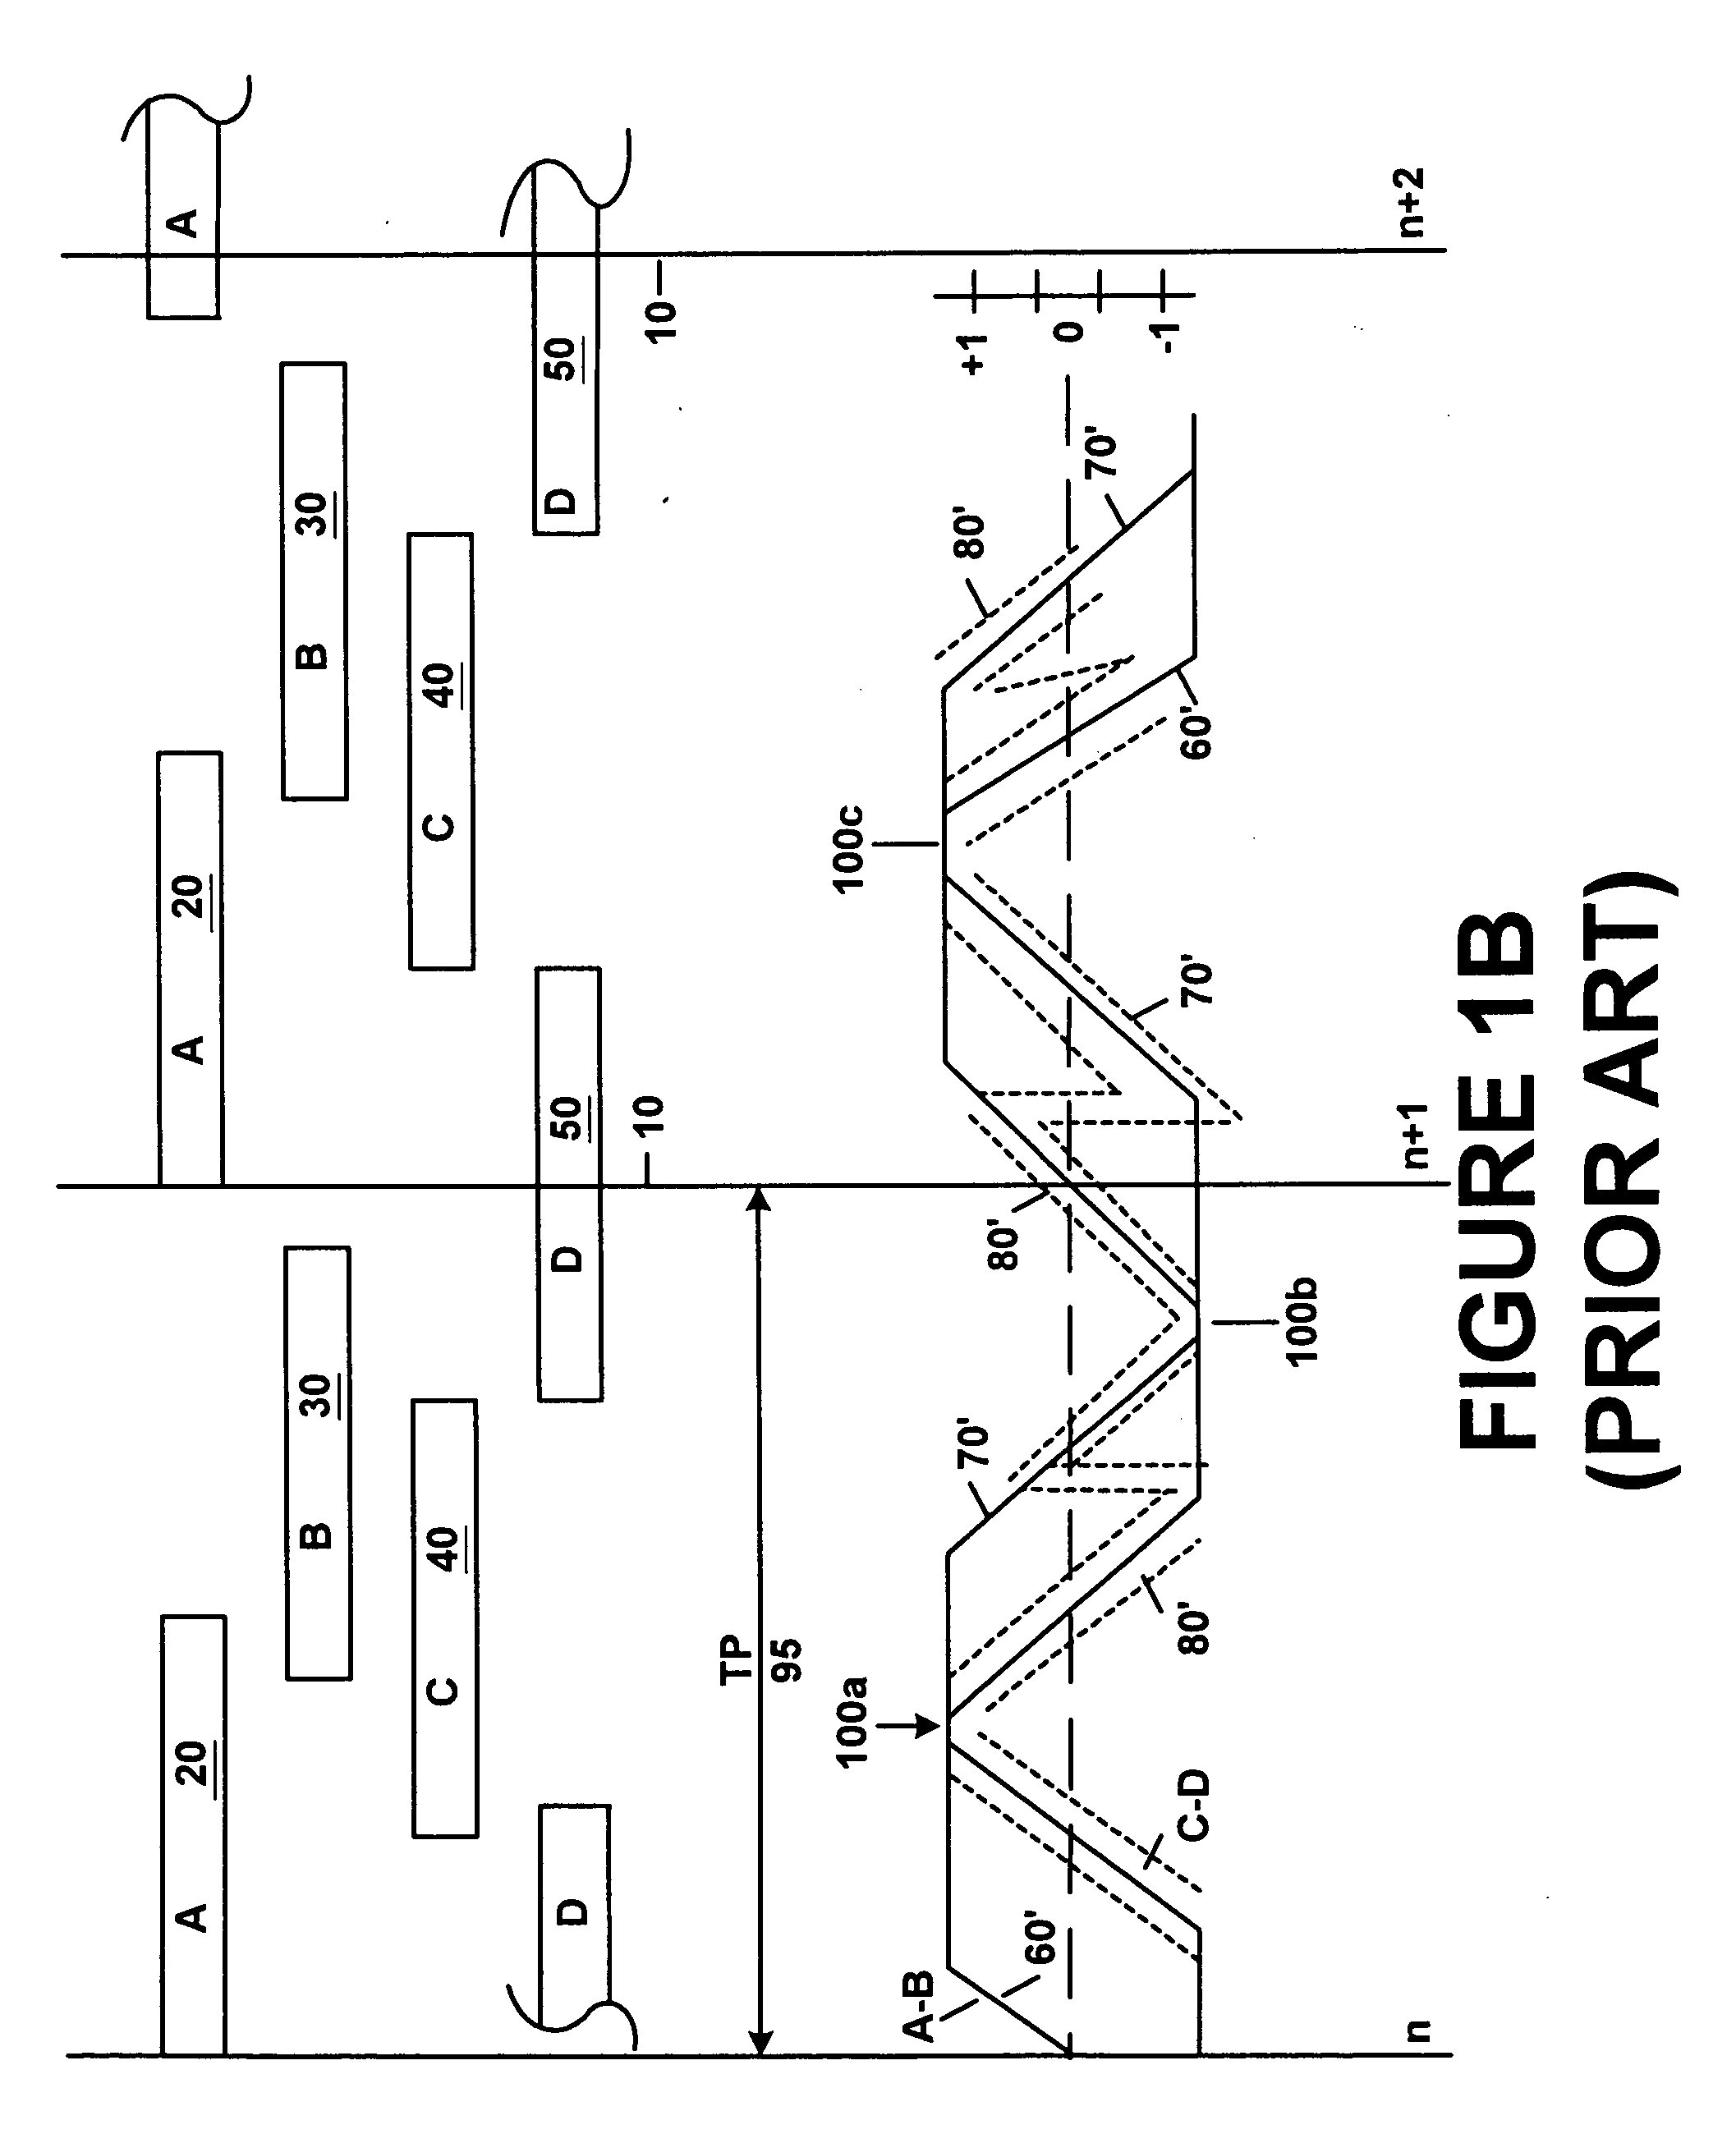 Seamless and untrimmed primary servo burst with multiple secondary servo bursts